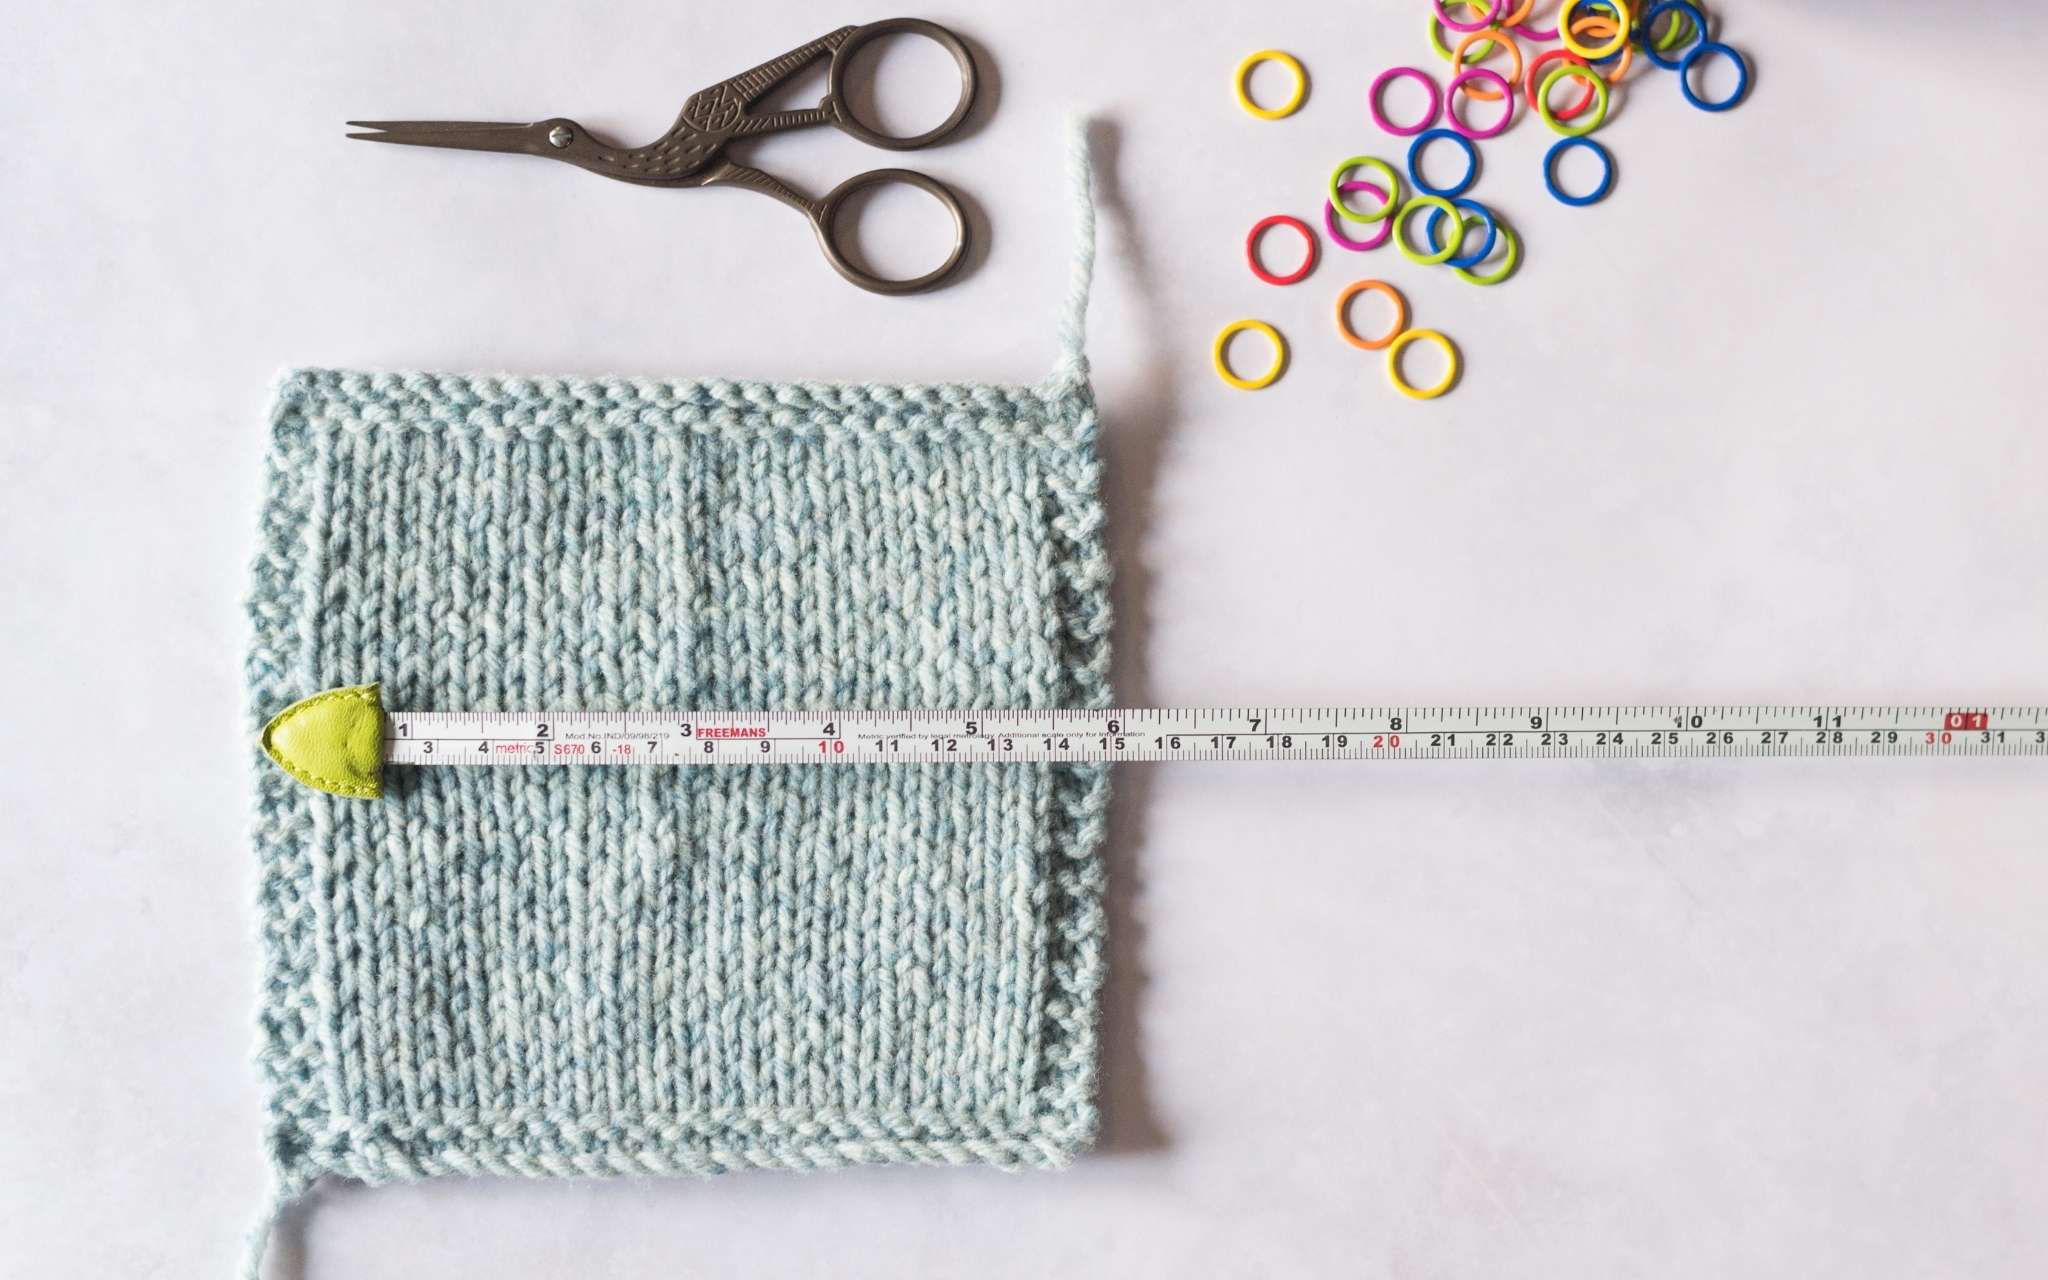 A pale blue stocking stitch swatch lies flat with a measuring tape extended across the centre. At the top of the image is a pair of small scissors and some brightly coloured stitch markers.